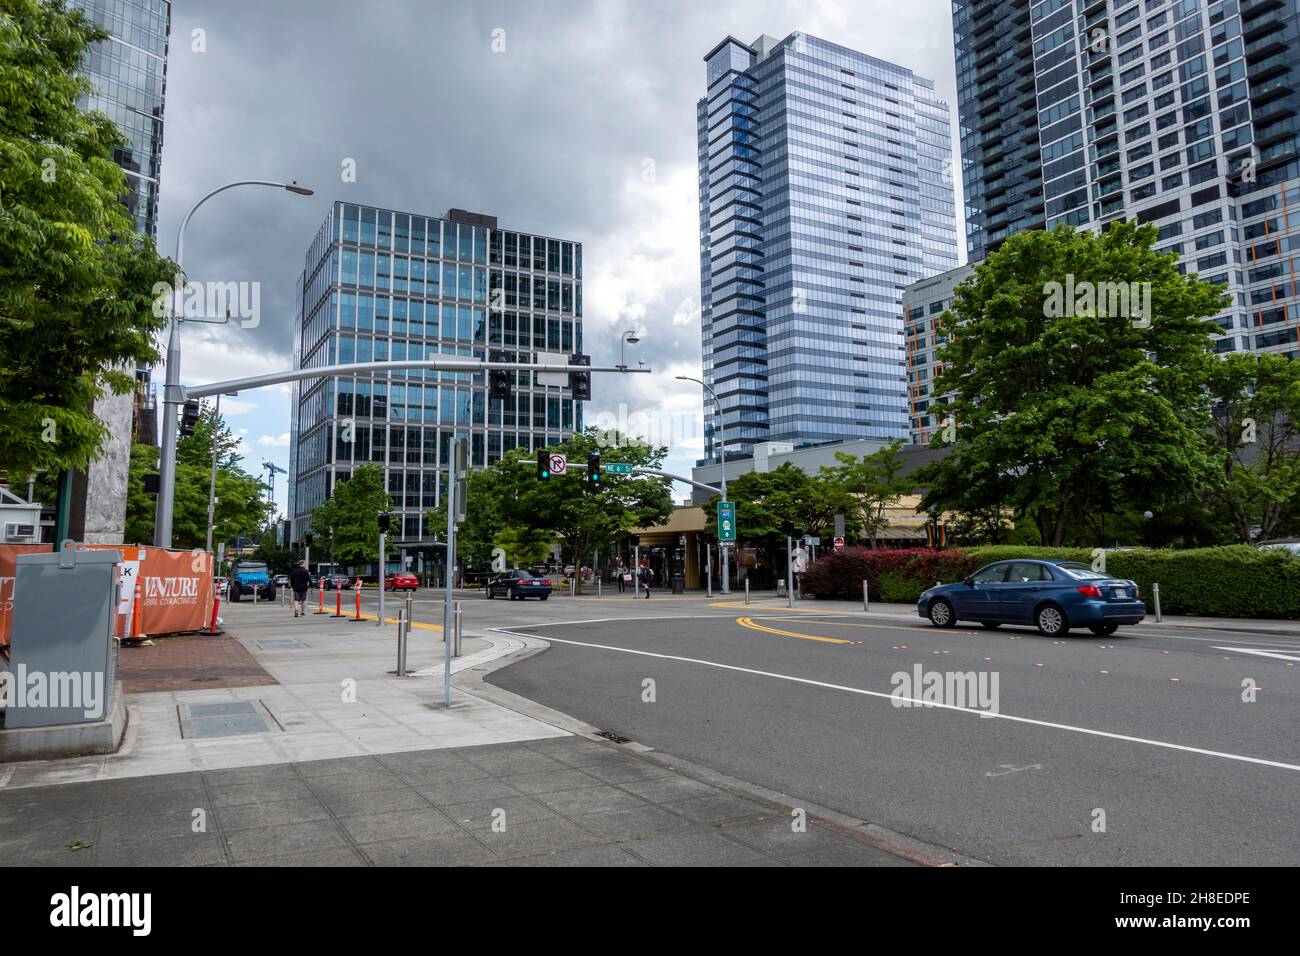 Bellevue, WA USA - circa June 2021: Street view of downtown Bellevue traffic near a construction site on an overcast day. Stock Photo